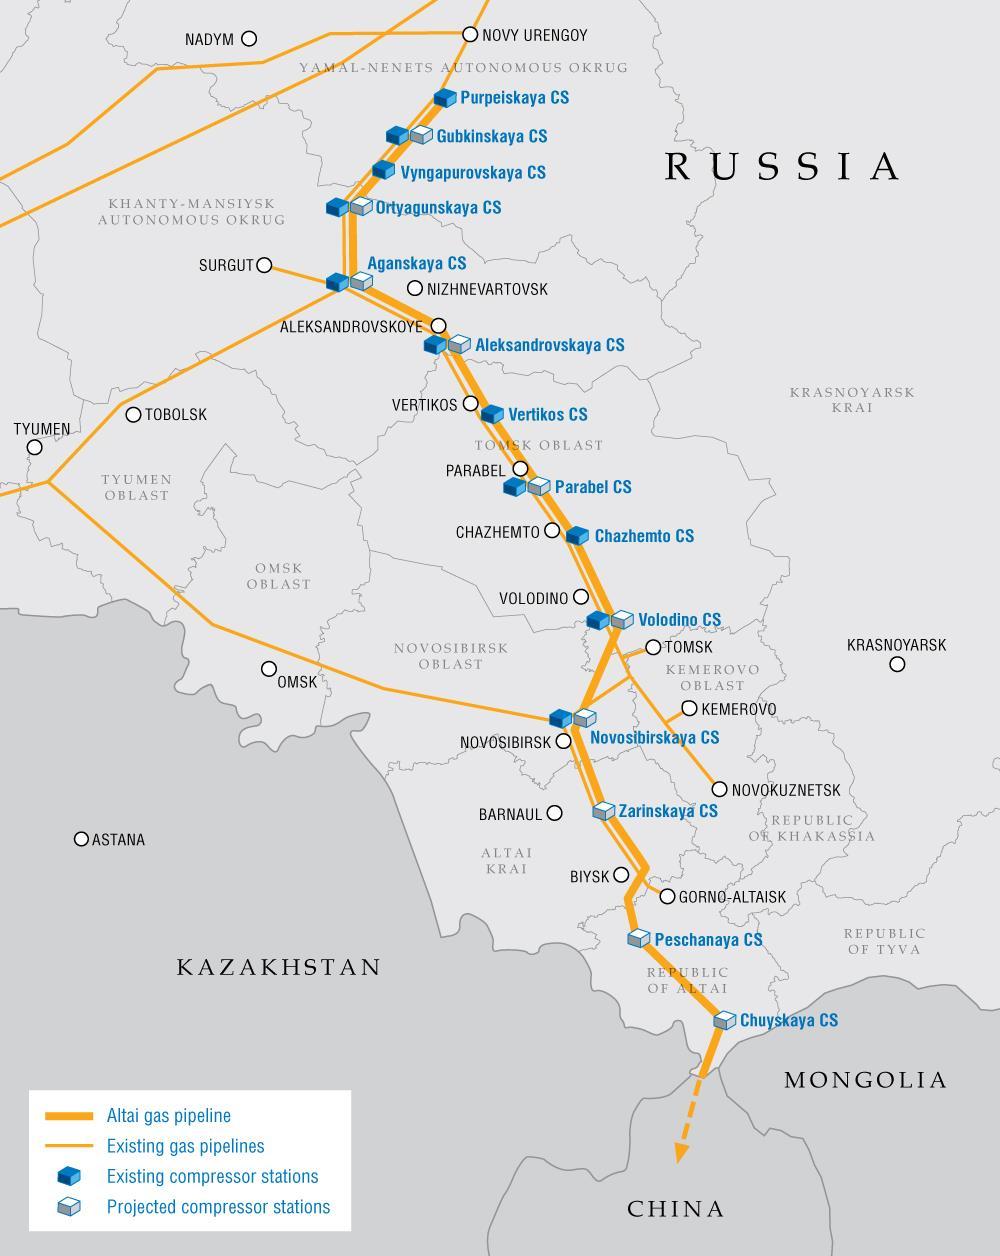 Western export route to China Negotiations about the export of gas to western China have begun again The Altai Pipeline Would create a link for 30bcm of West Siberian gas to Asia Competition with